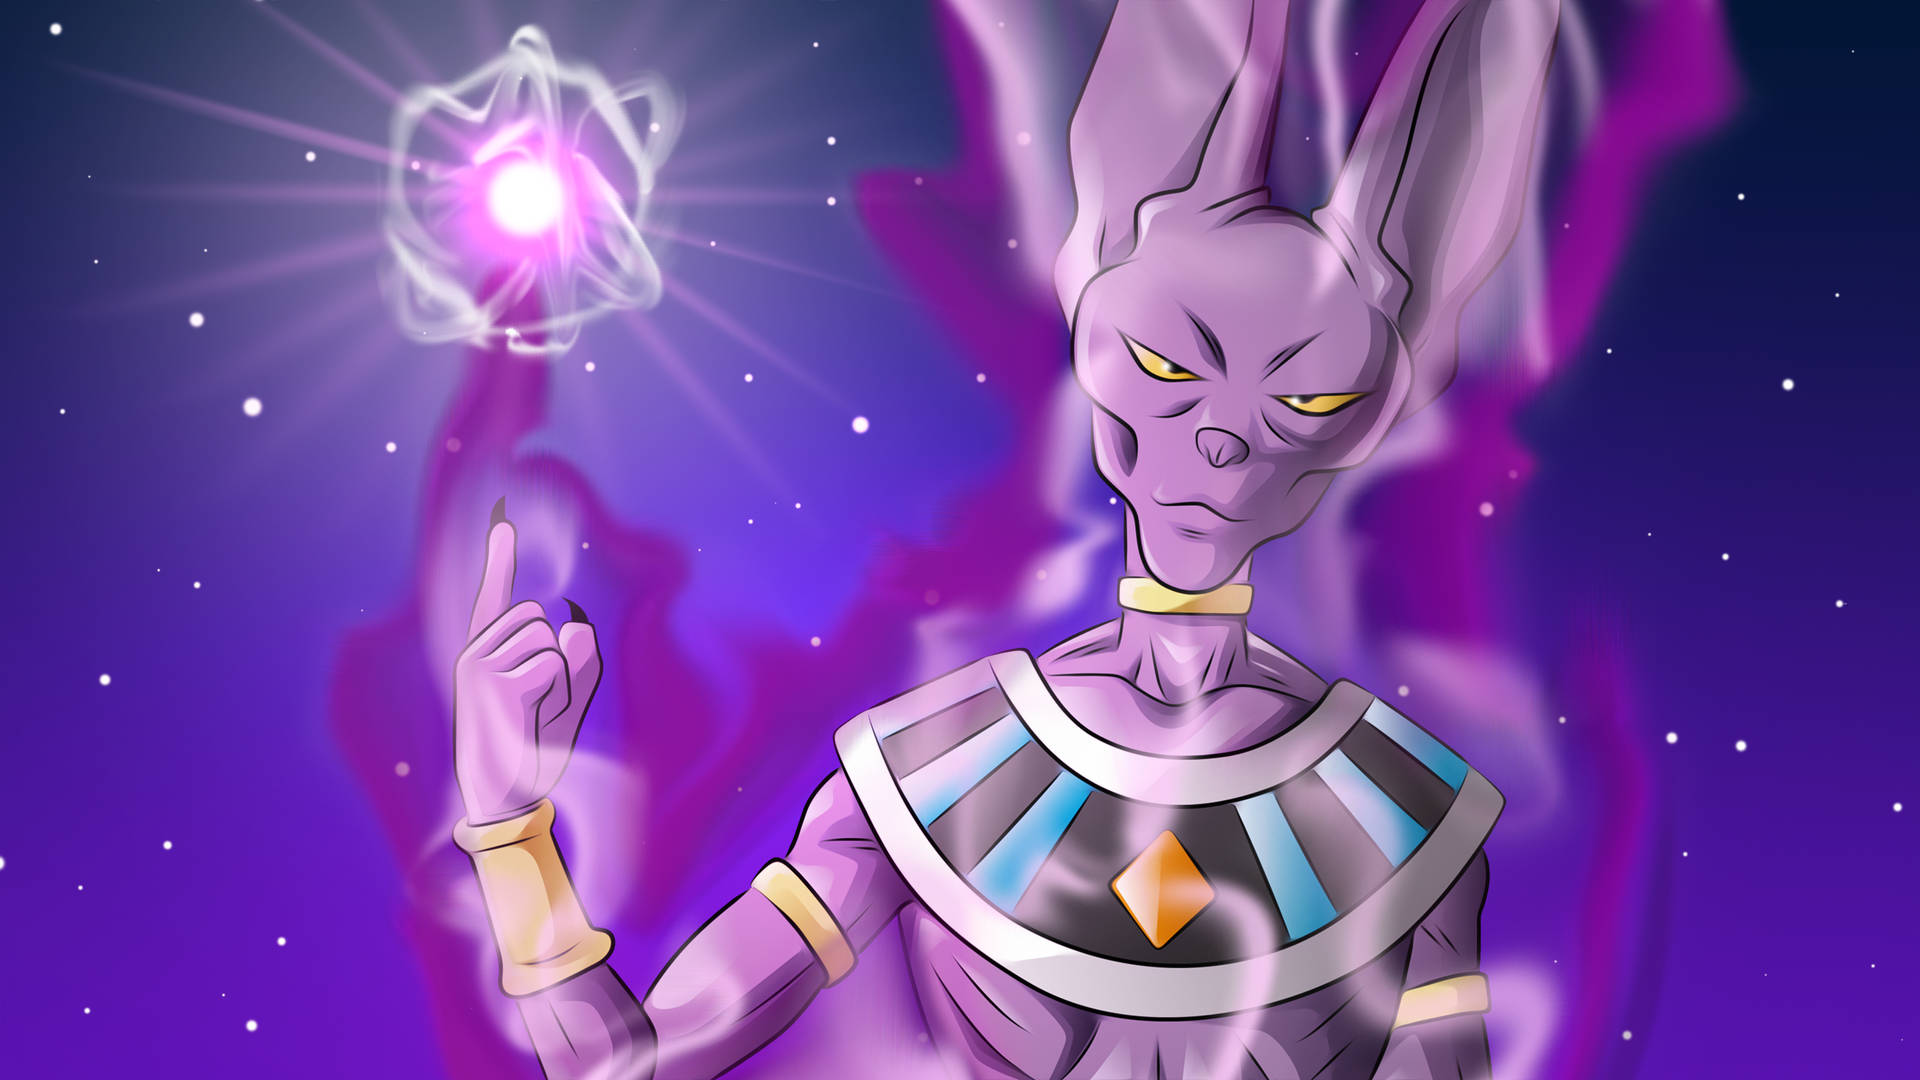 Dragon Ball Z's Beerus Charges Up